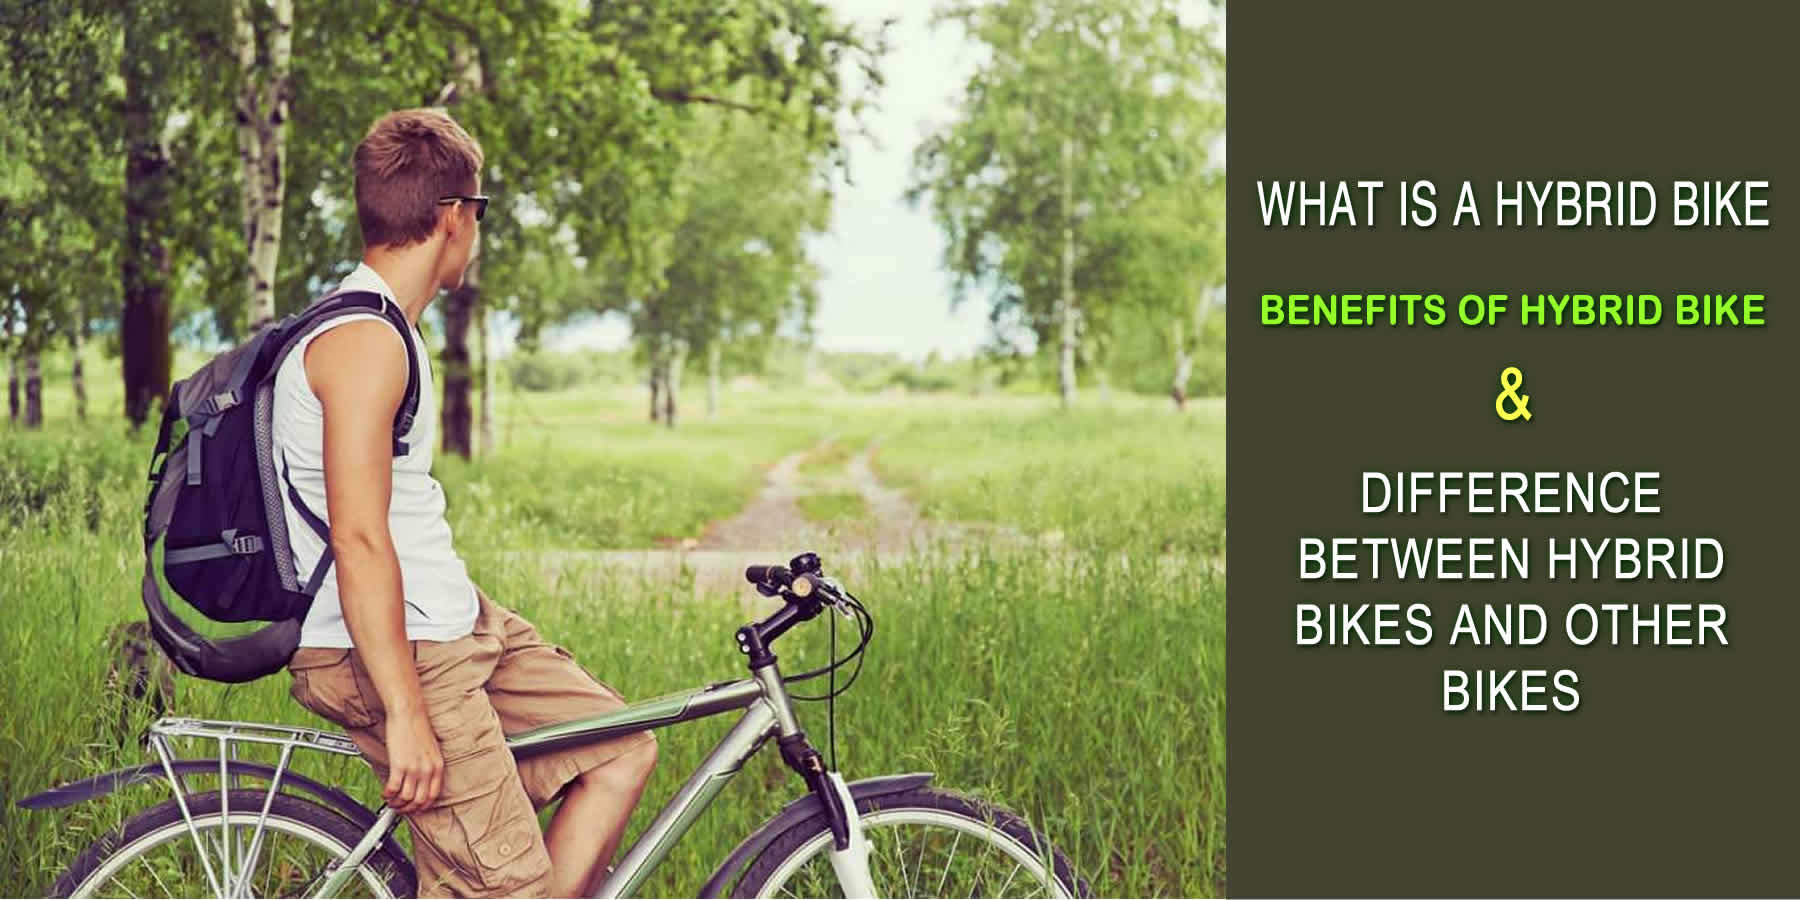 What Is A Hybrid Bike? Benefits Of Hybrid Bike. Difference Between Hybrid Bikes And Other Bikes.